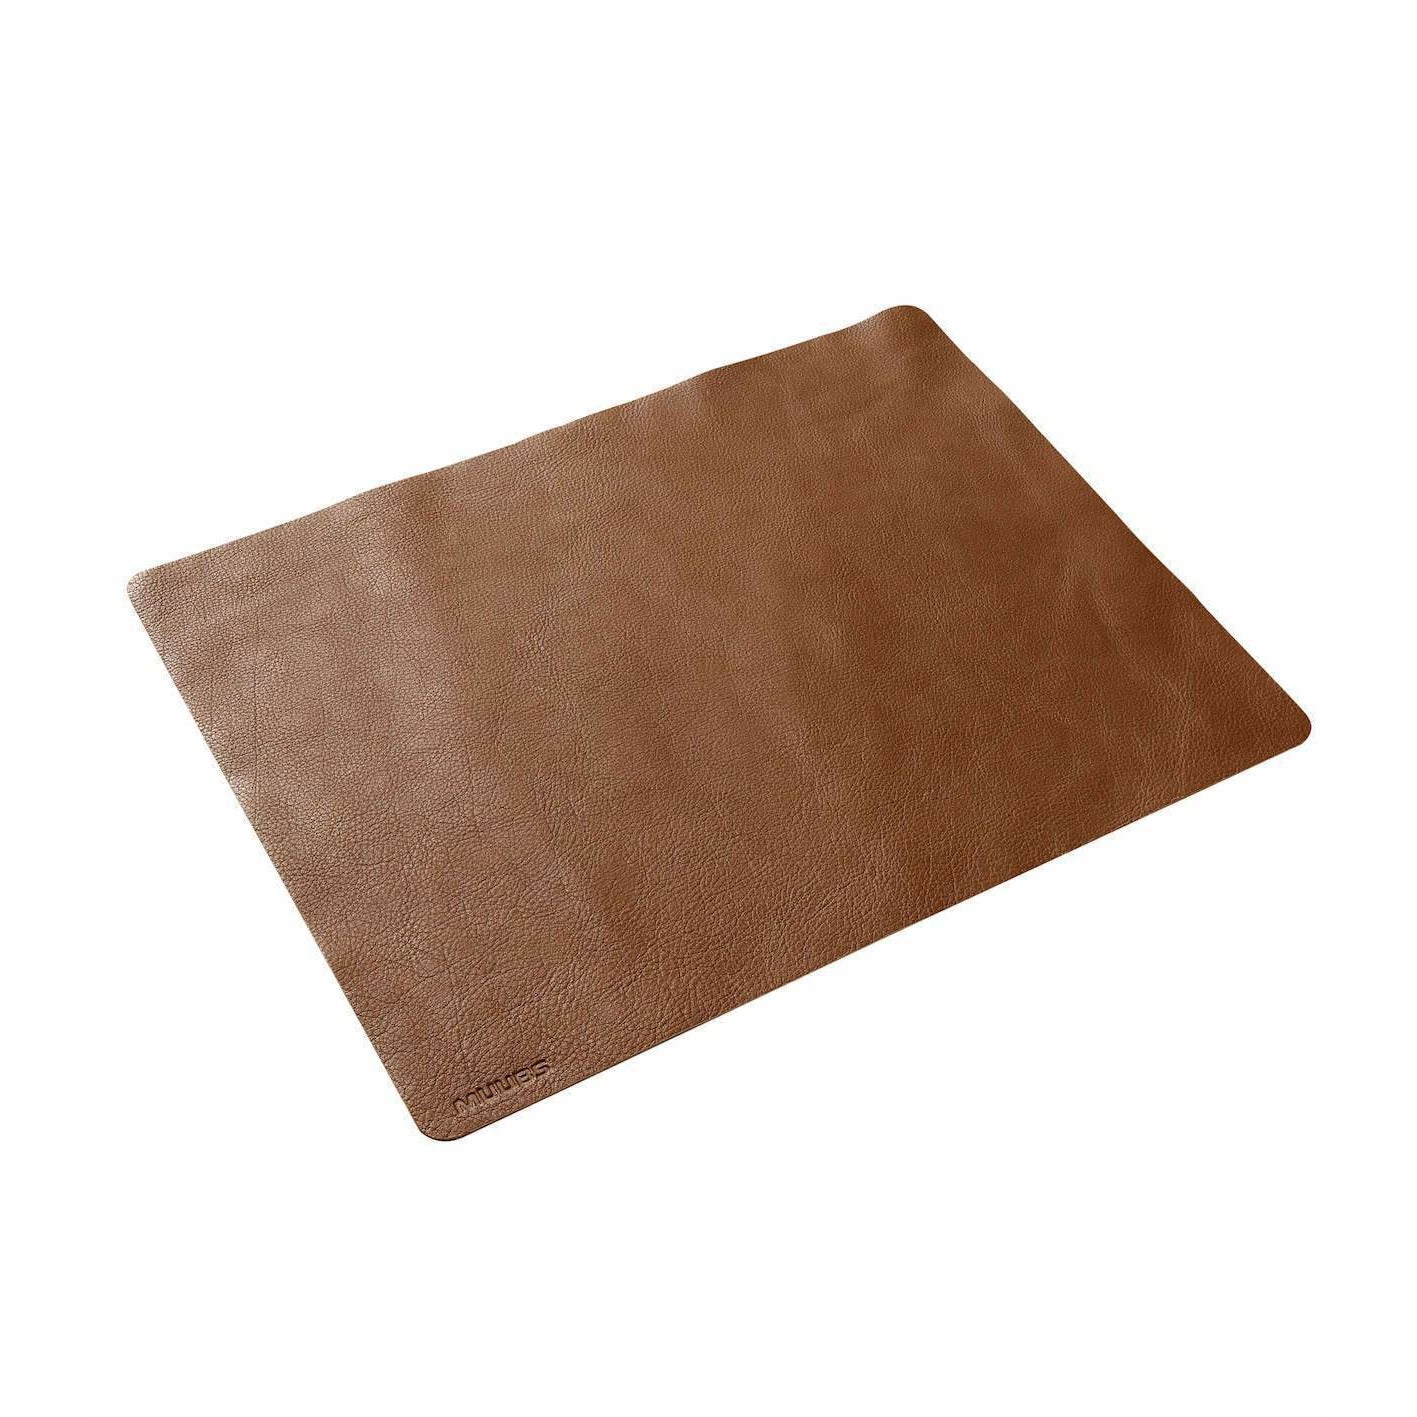 Muubs Camou placemat 45 cm, bruin leer